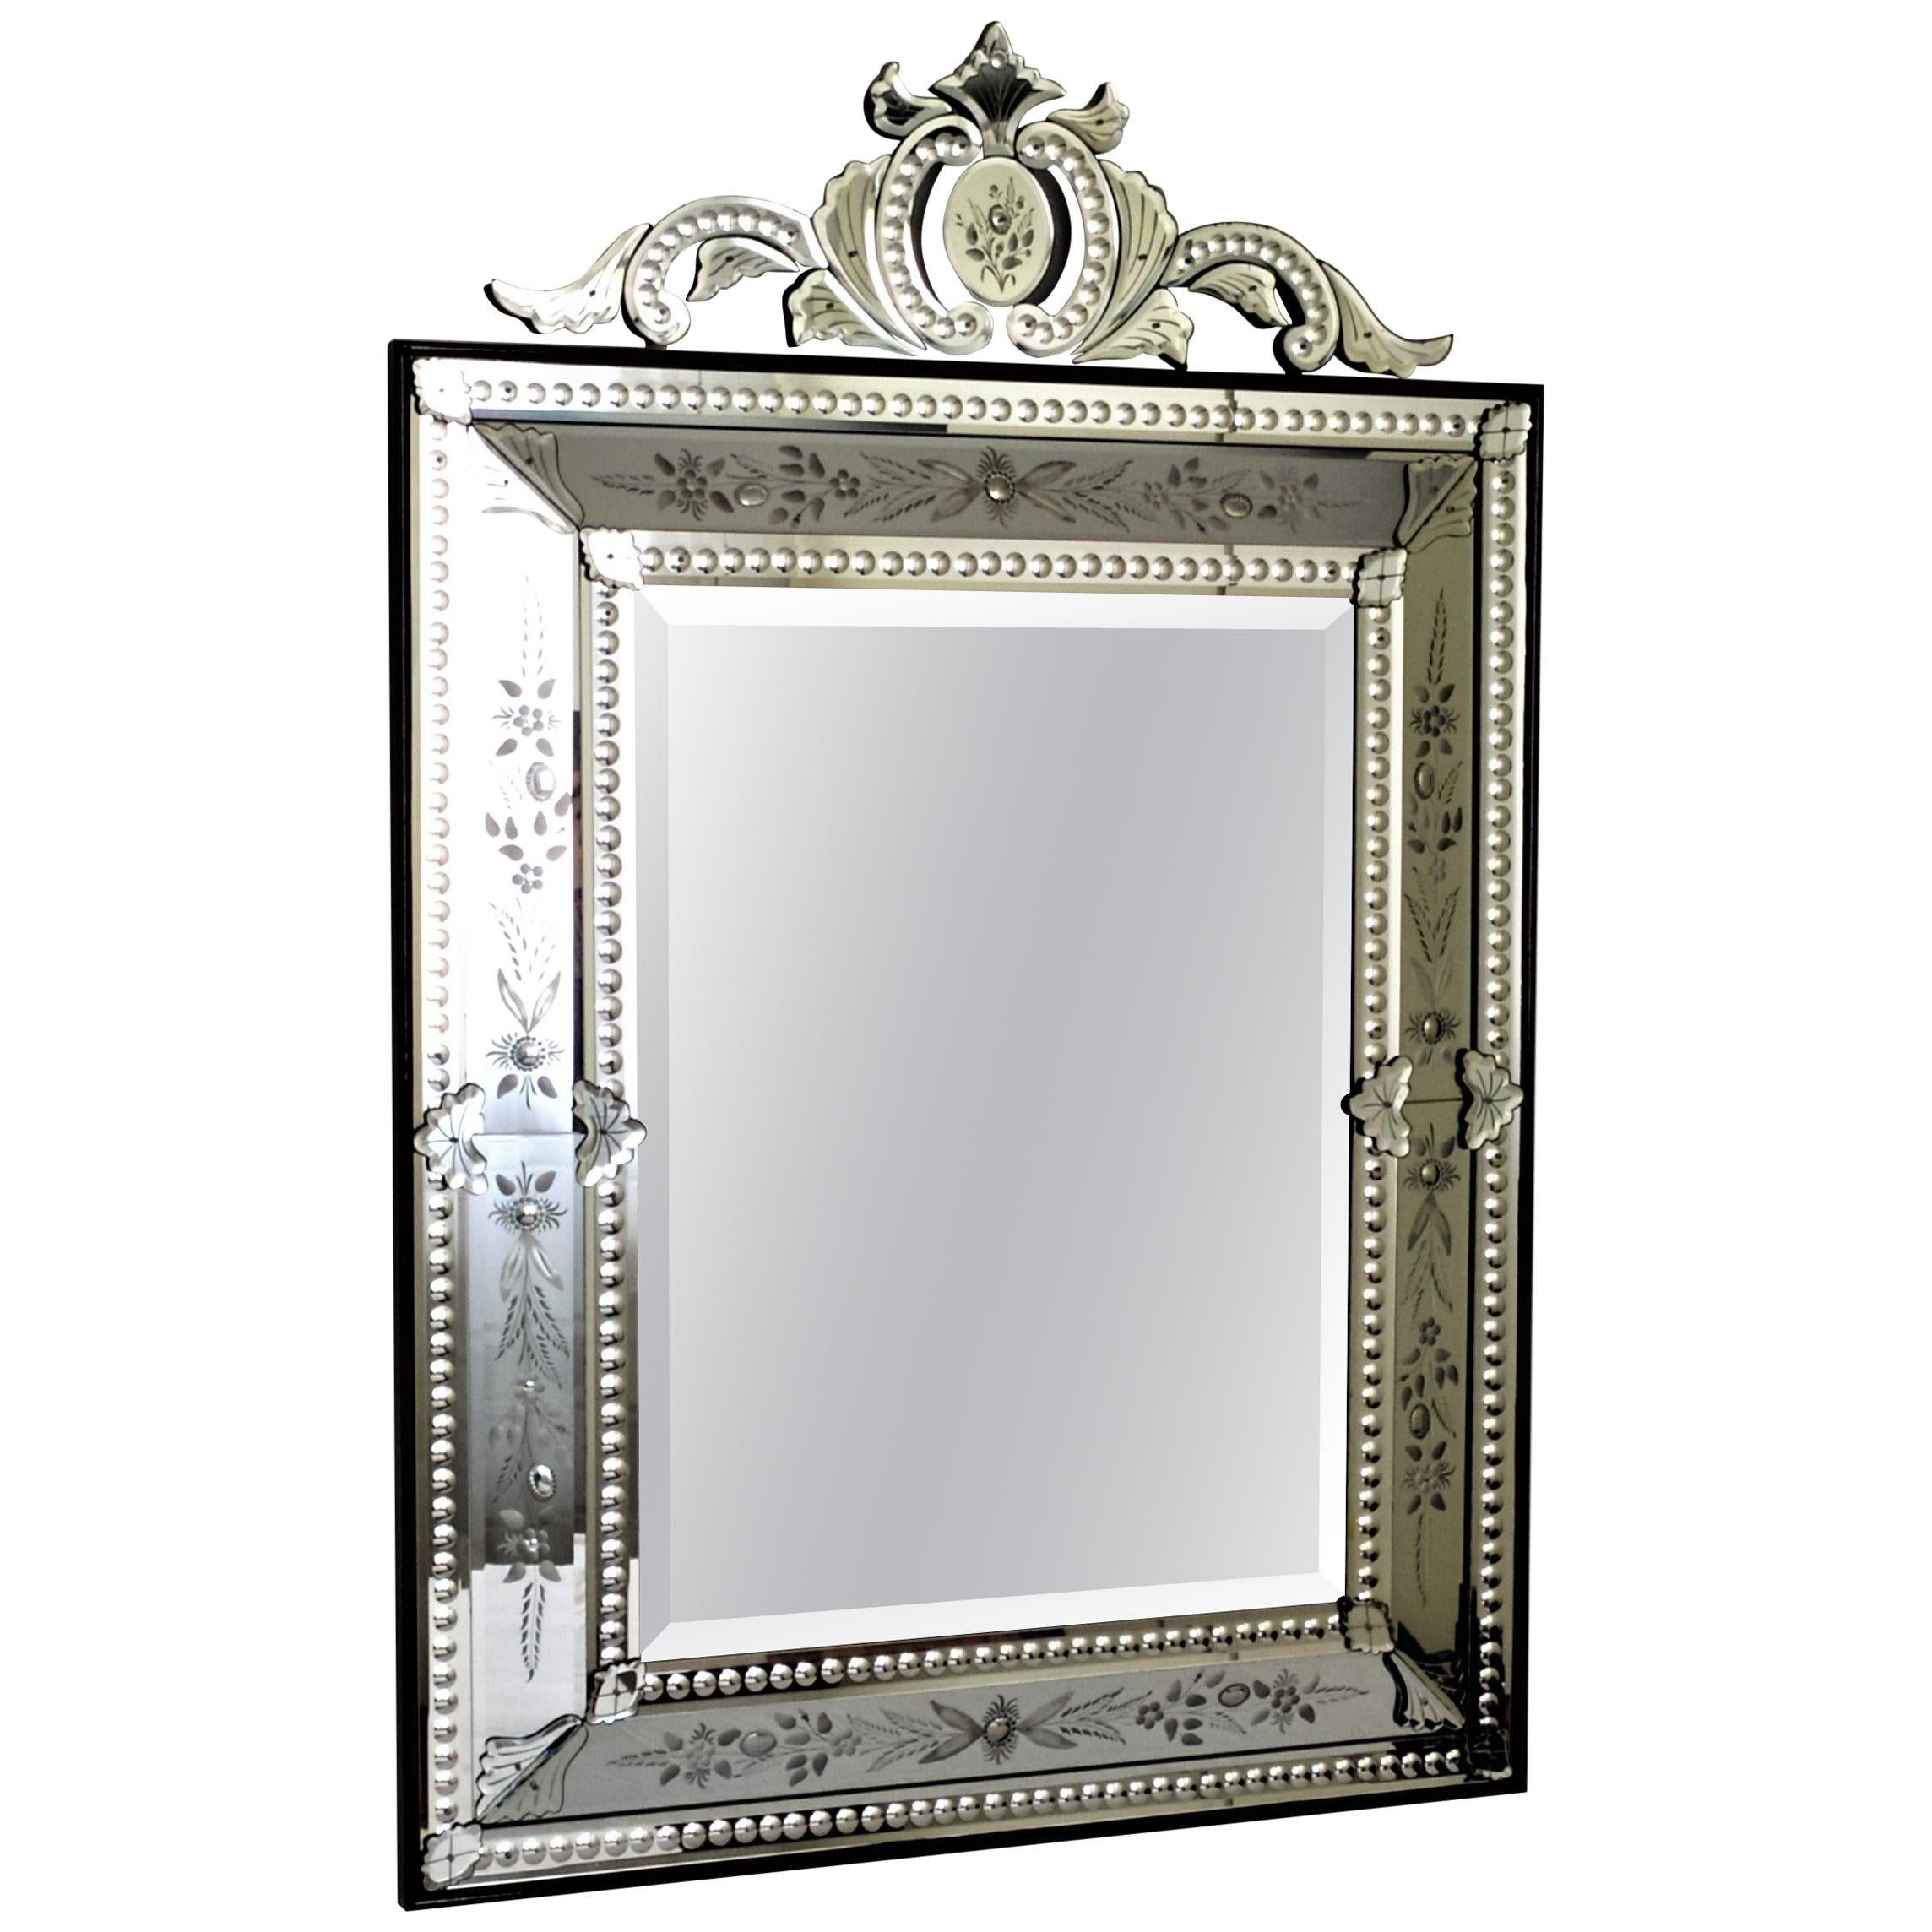 "Ca' Rezzonico" Murano Glass Mirror in French Style Handcrafted by Fratelli Tosi